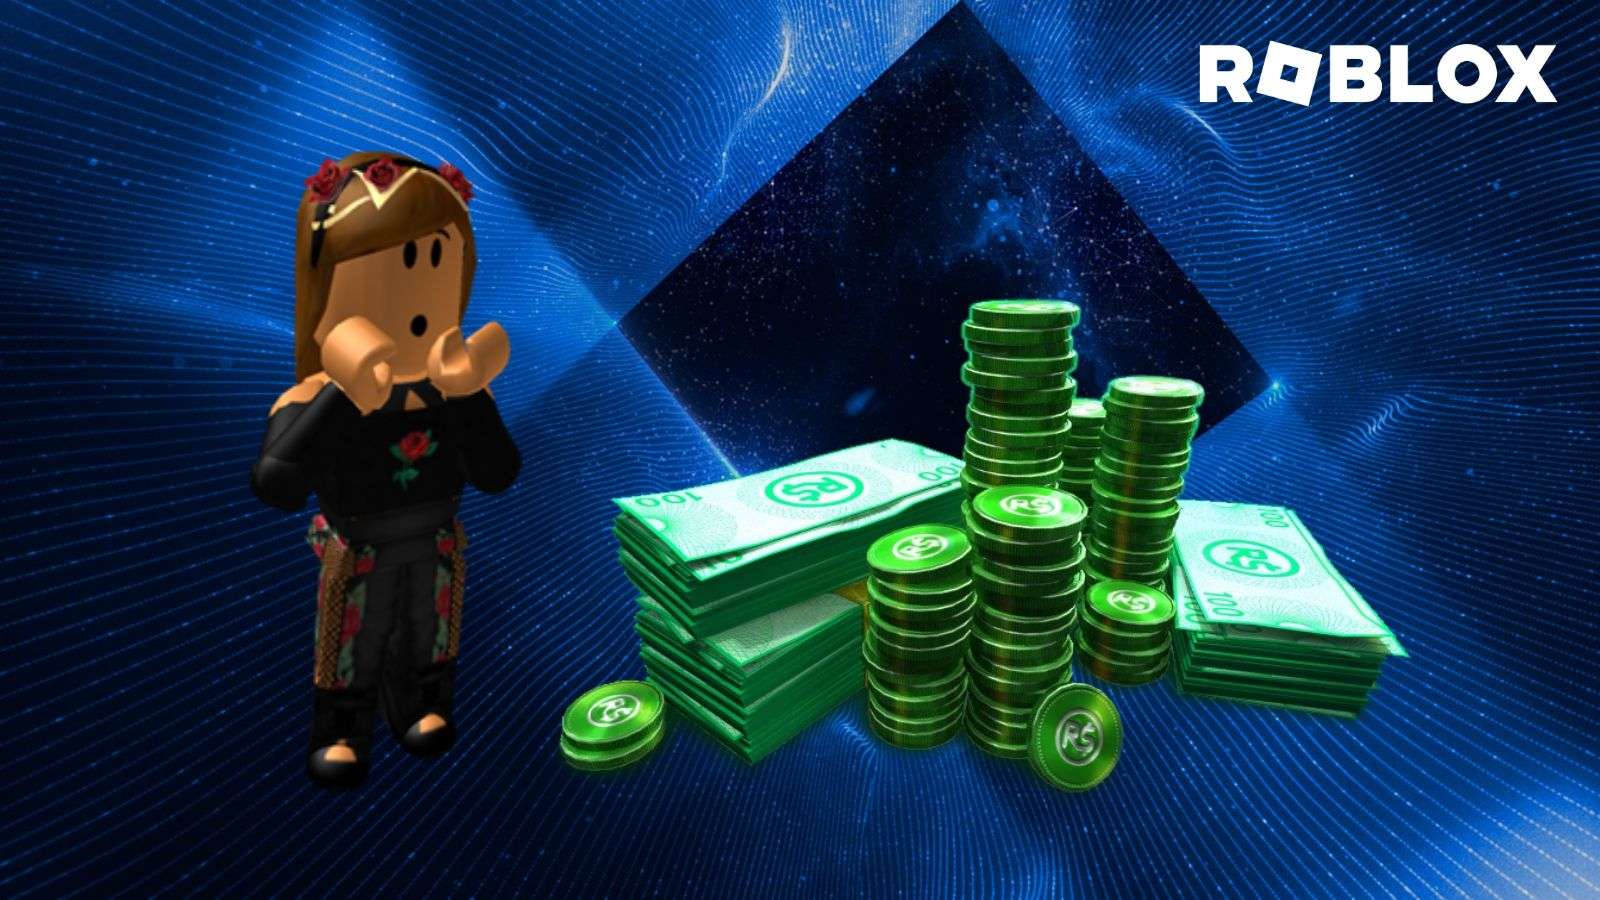 Stacks of Robux and a Roblox Avatar